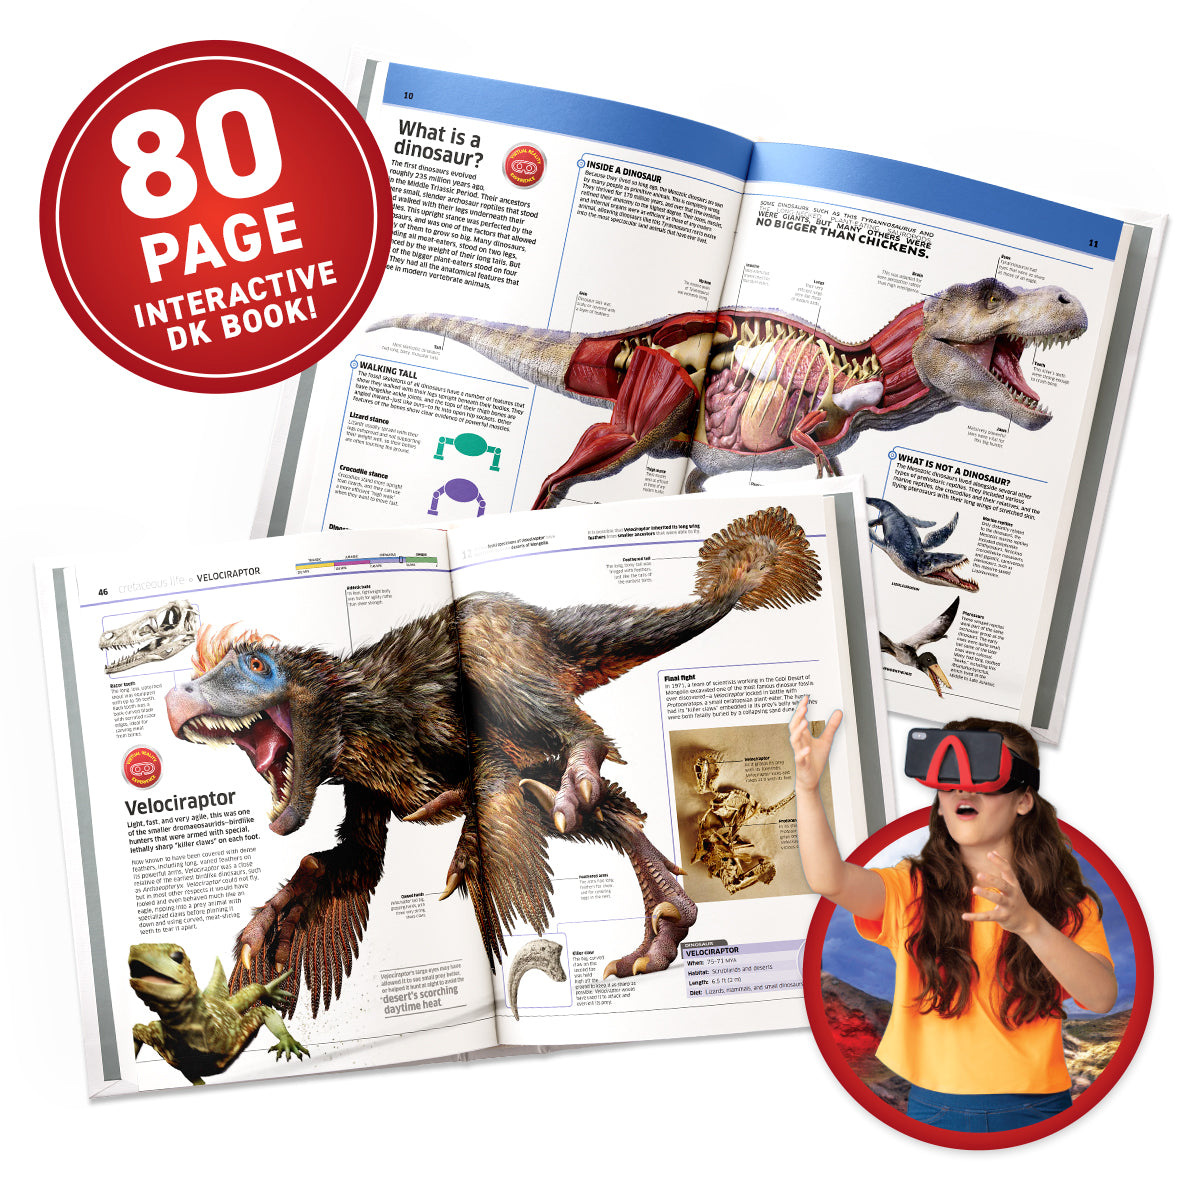 Virtual Reality Discovery Gift Set w/ DK Book - Dinosaurs!